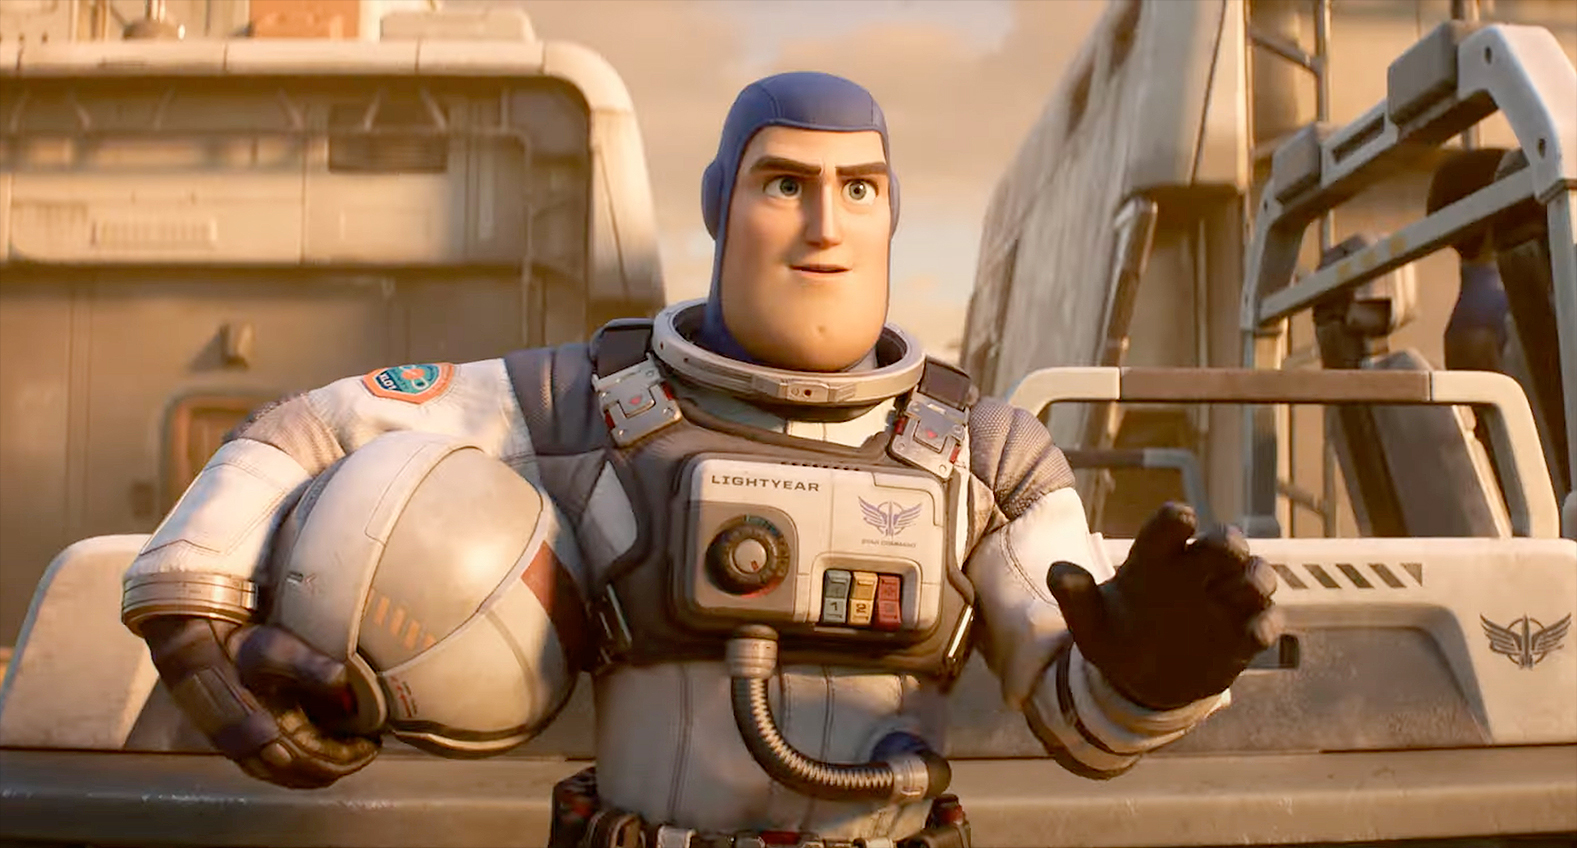 Buzz Lightyear's first costume "Light year" was modeled after the first years of human space exploration with bulky parts.